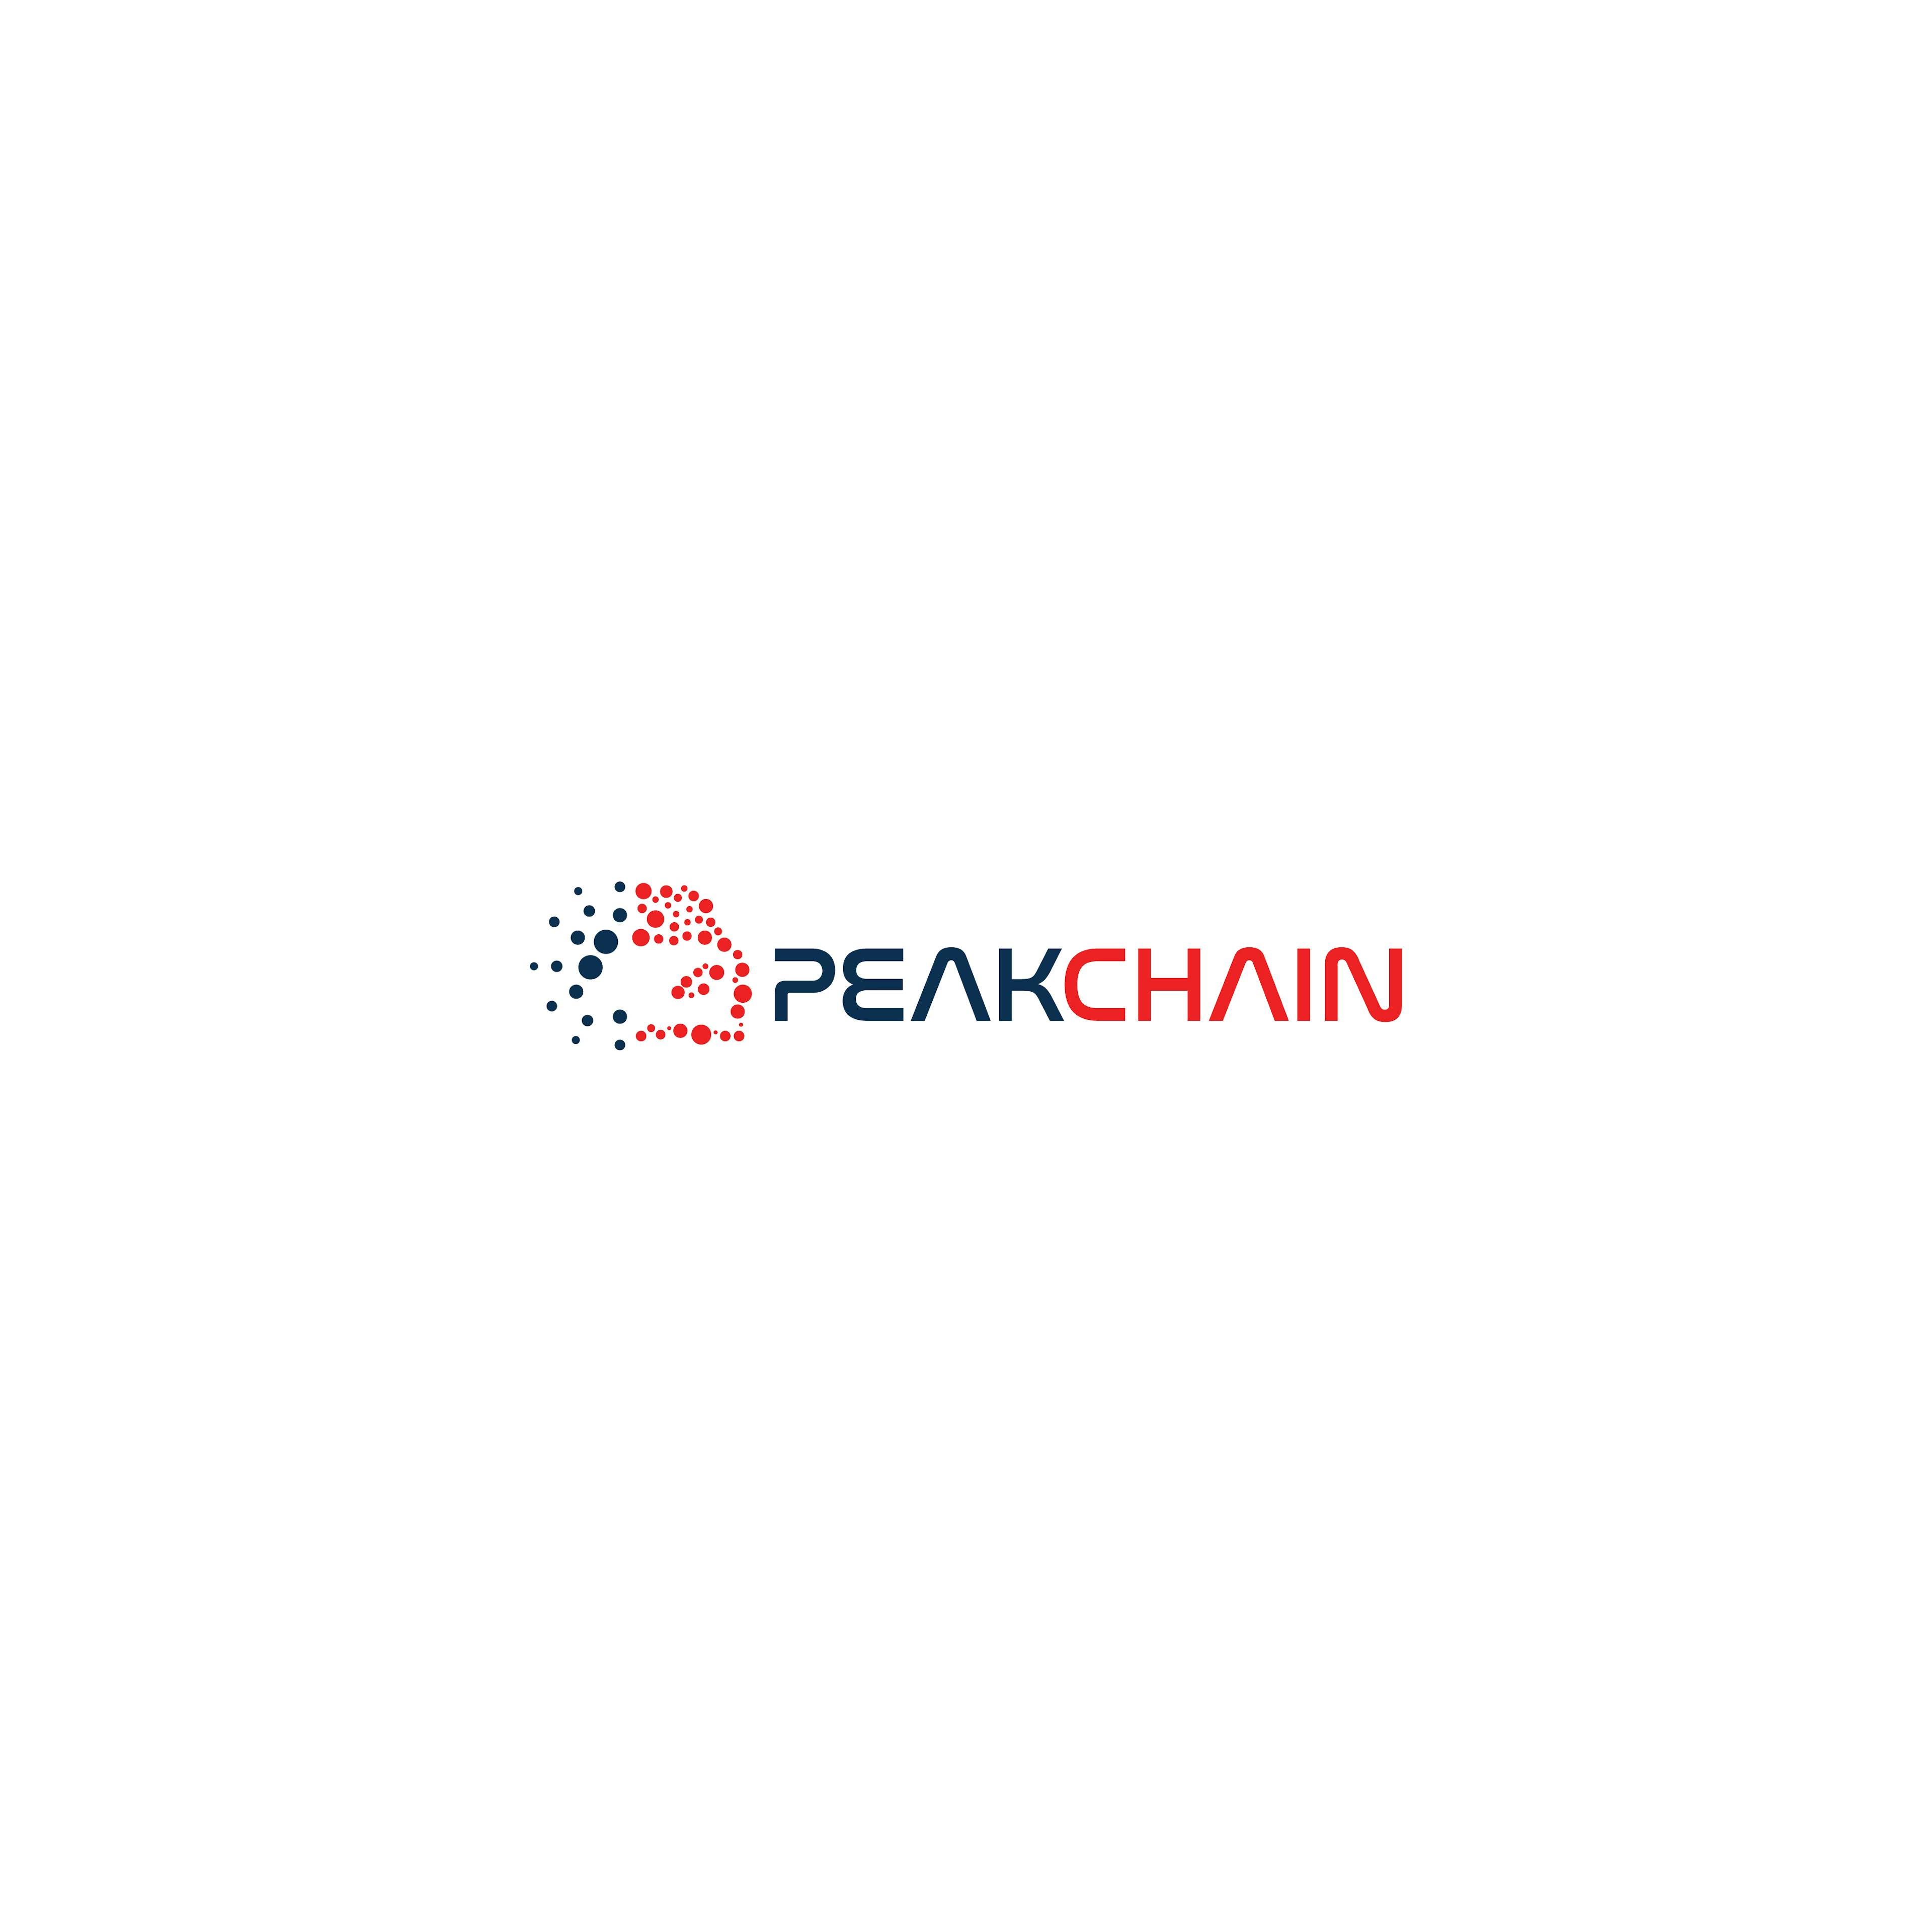 PeakChain: Connected Car Solution Provider on Cardano